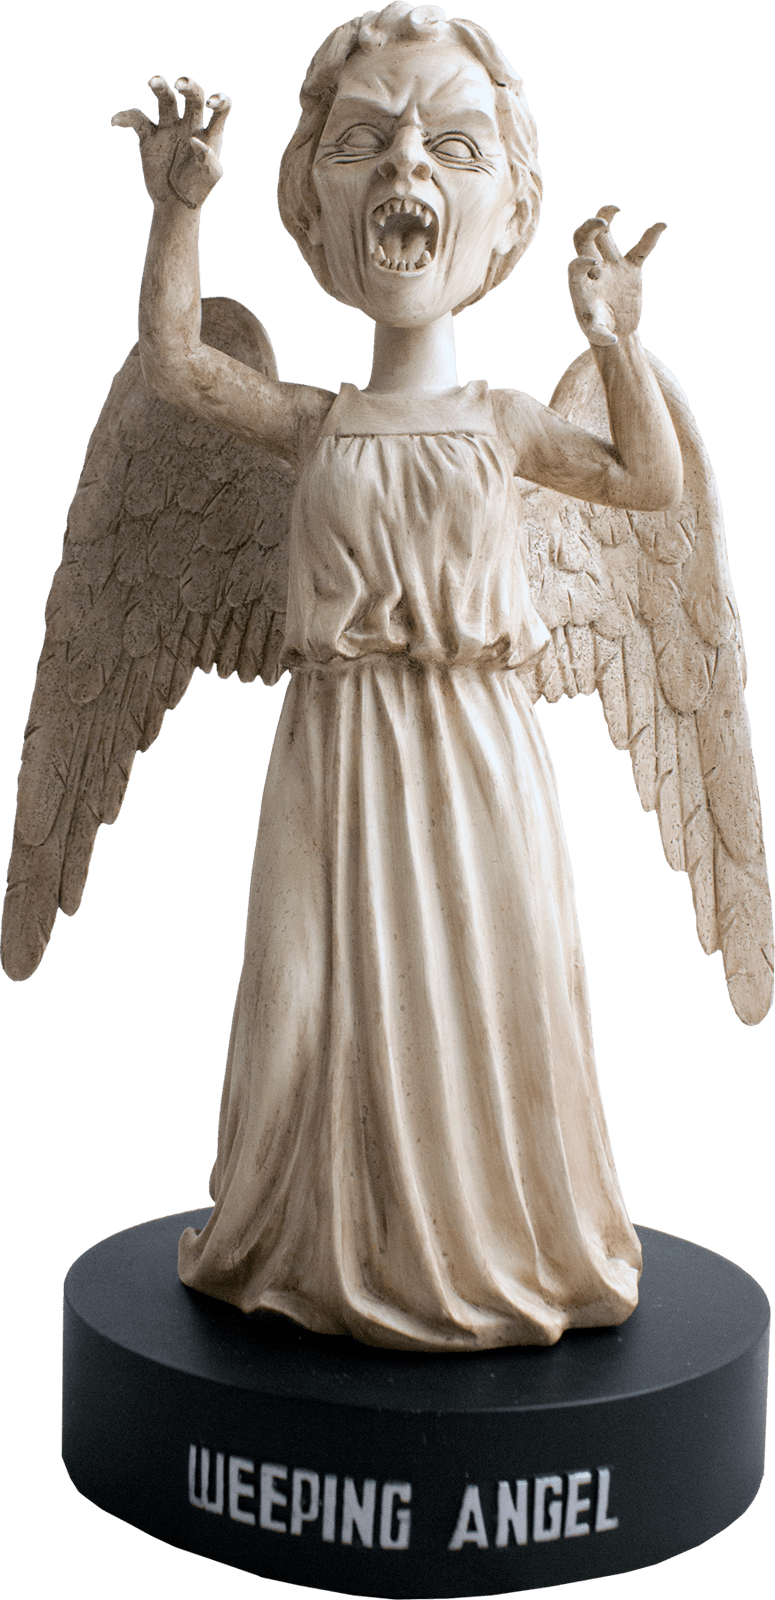 weeping-angel-dr-who-transparent-background-gameznet-38.png